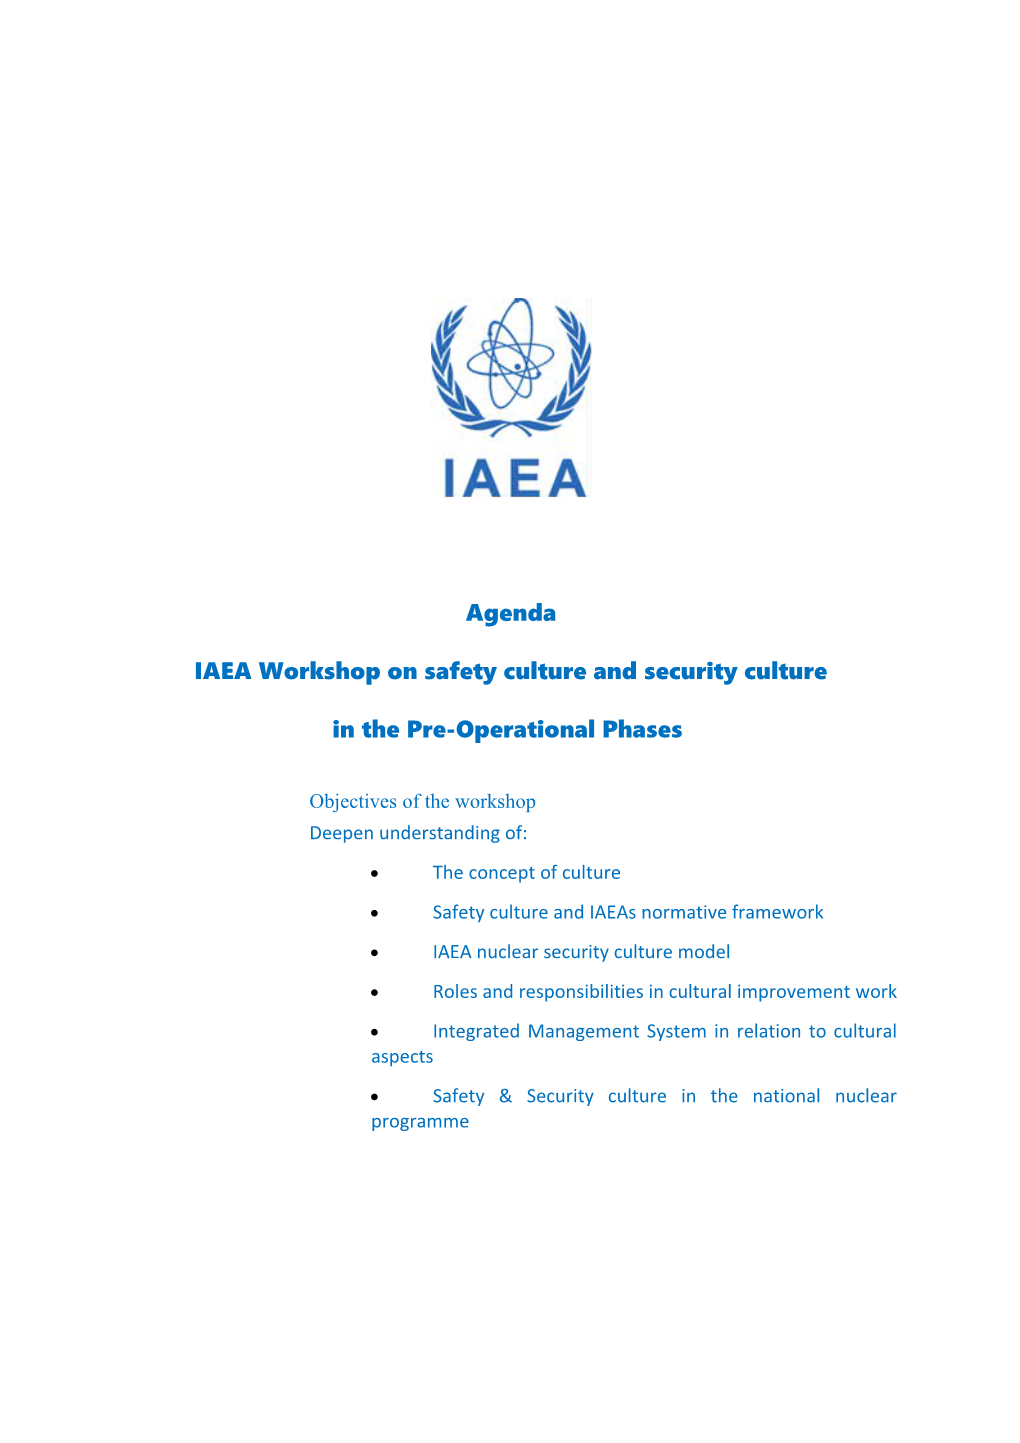 IAEA Workshop on Safety Culture and Security Culture